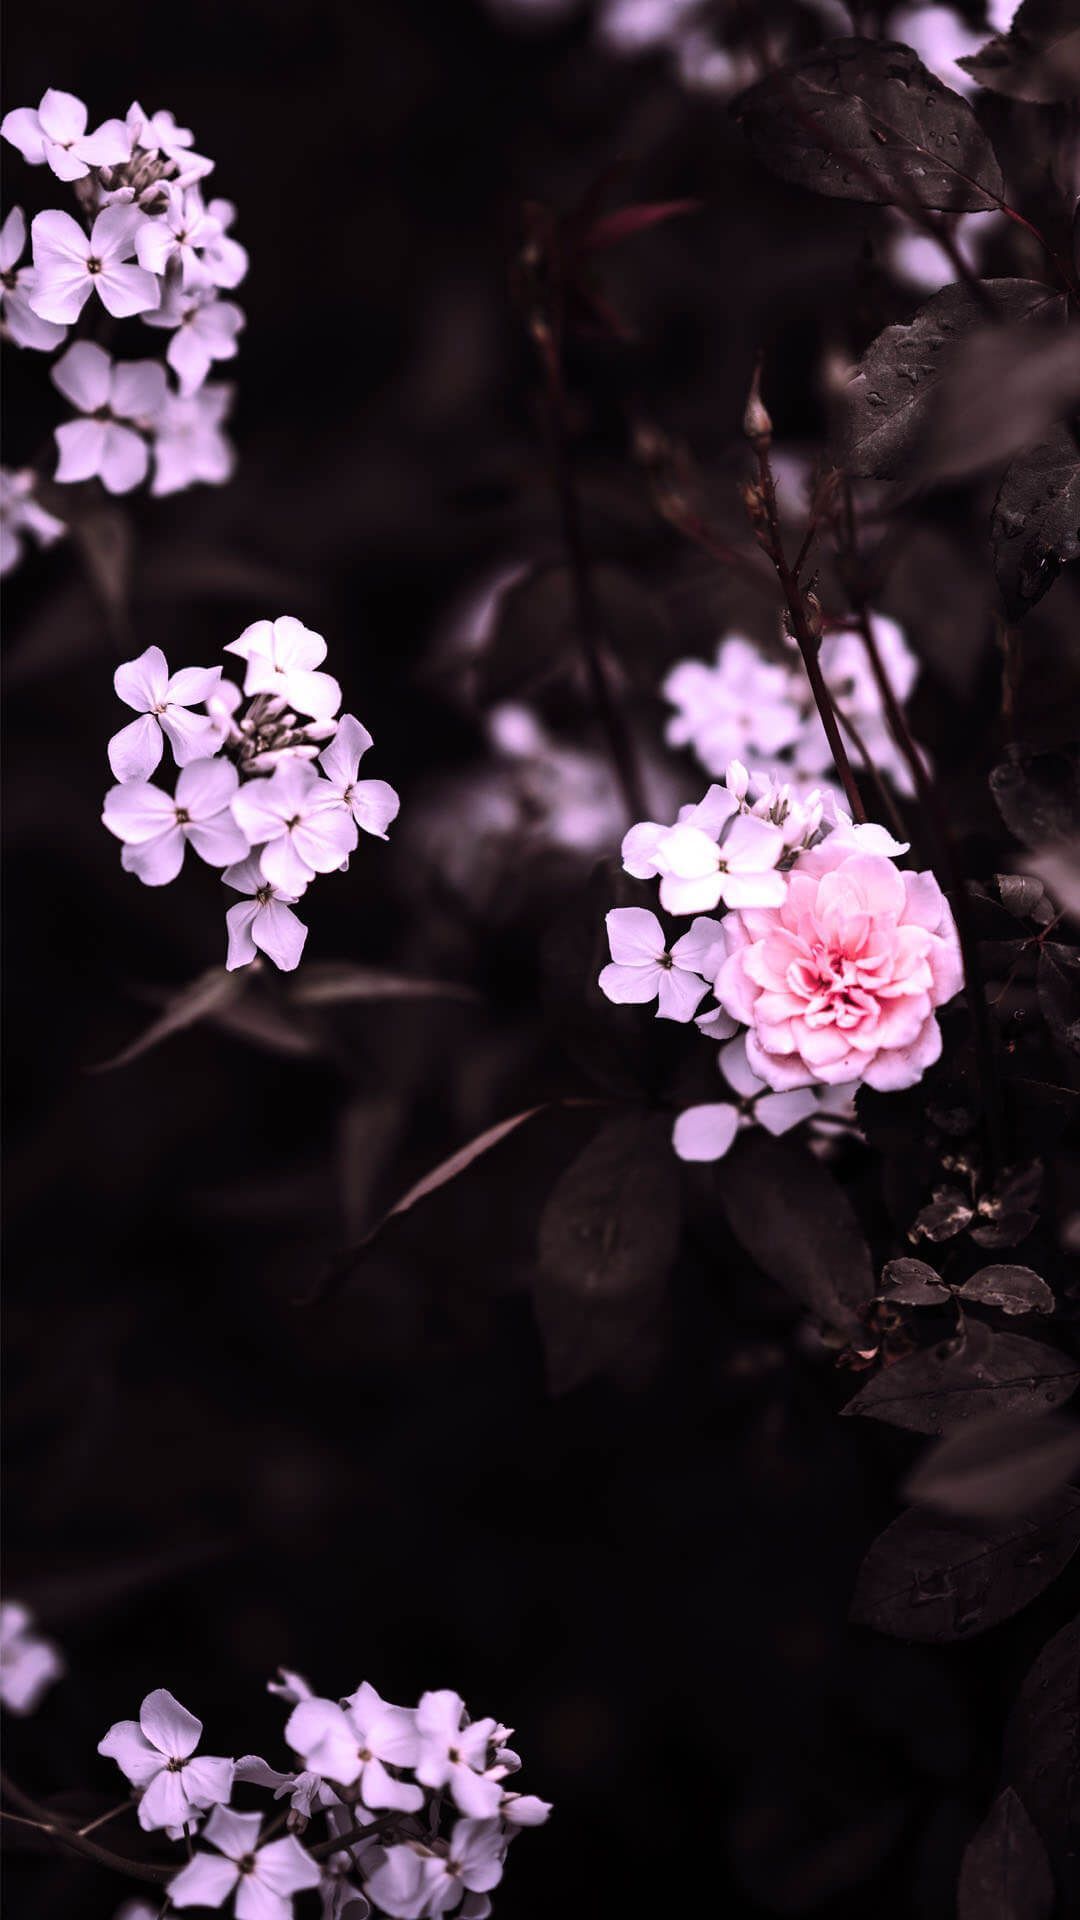 Black and Pink Aesthetic Wallpaper Free Black and Pink Aesthetic Background